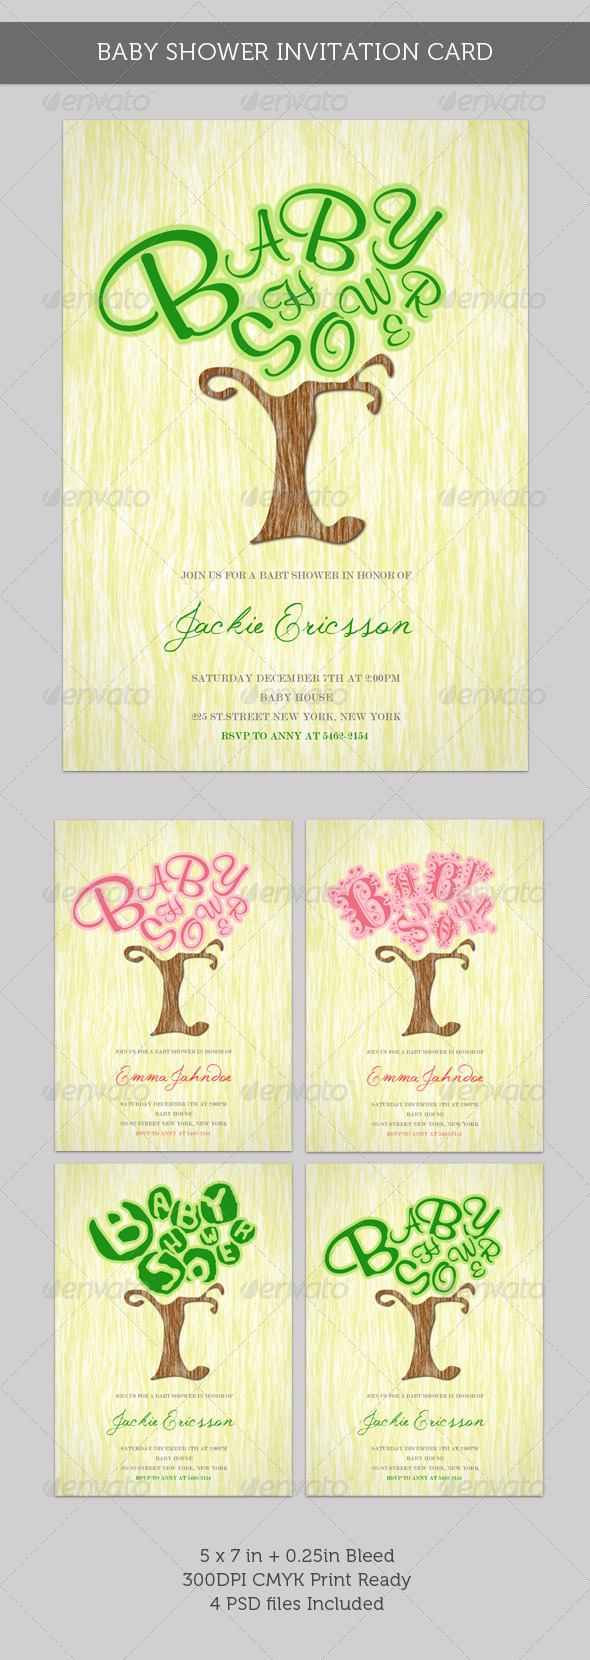 Graphic River Baby Shower Invitation Card Growing Tree Print Templates ...